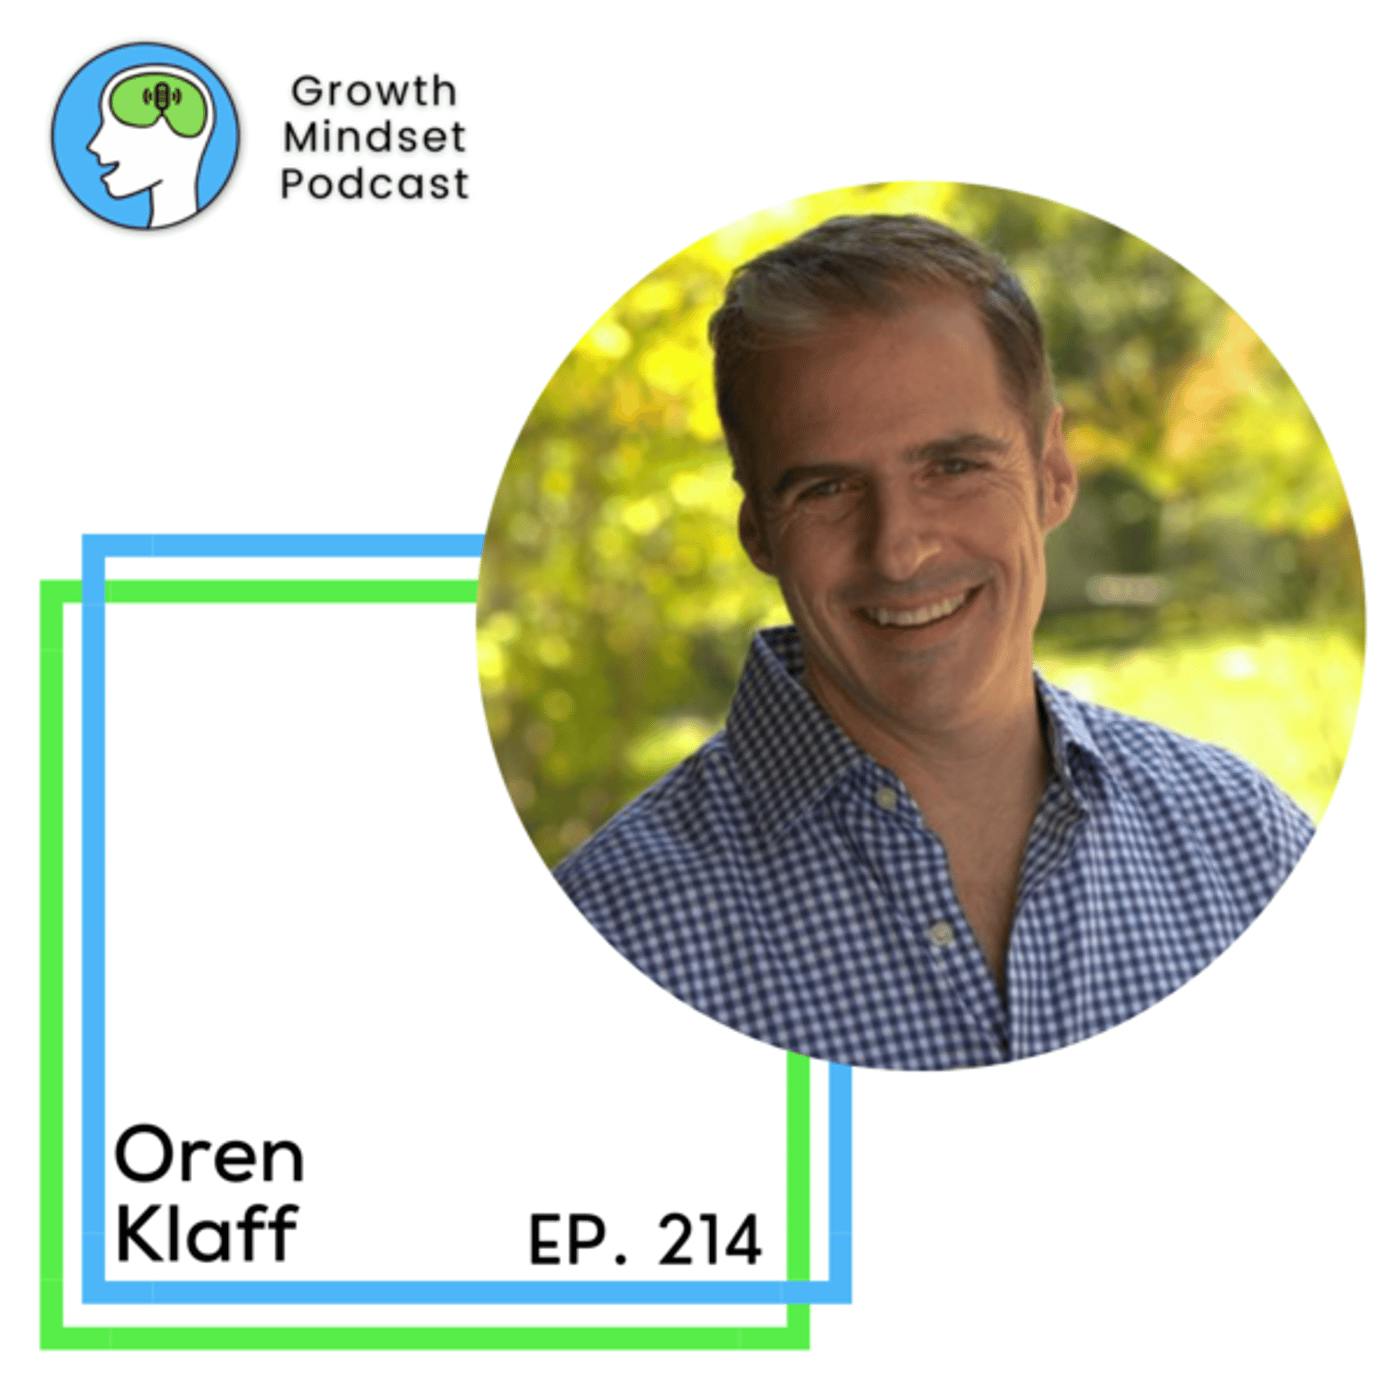 Pitch anything - Close deals with Oren Klaff